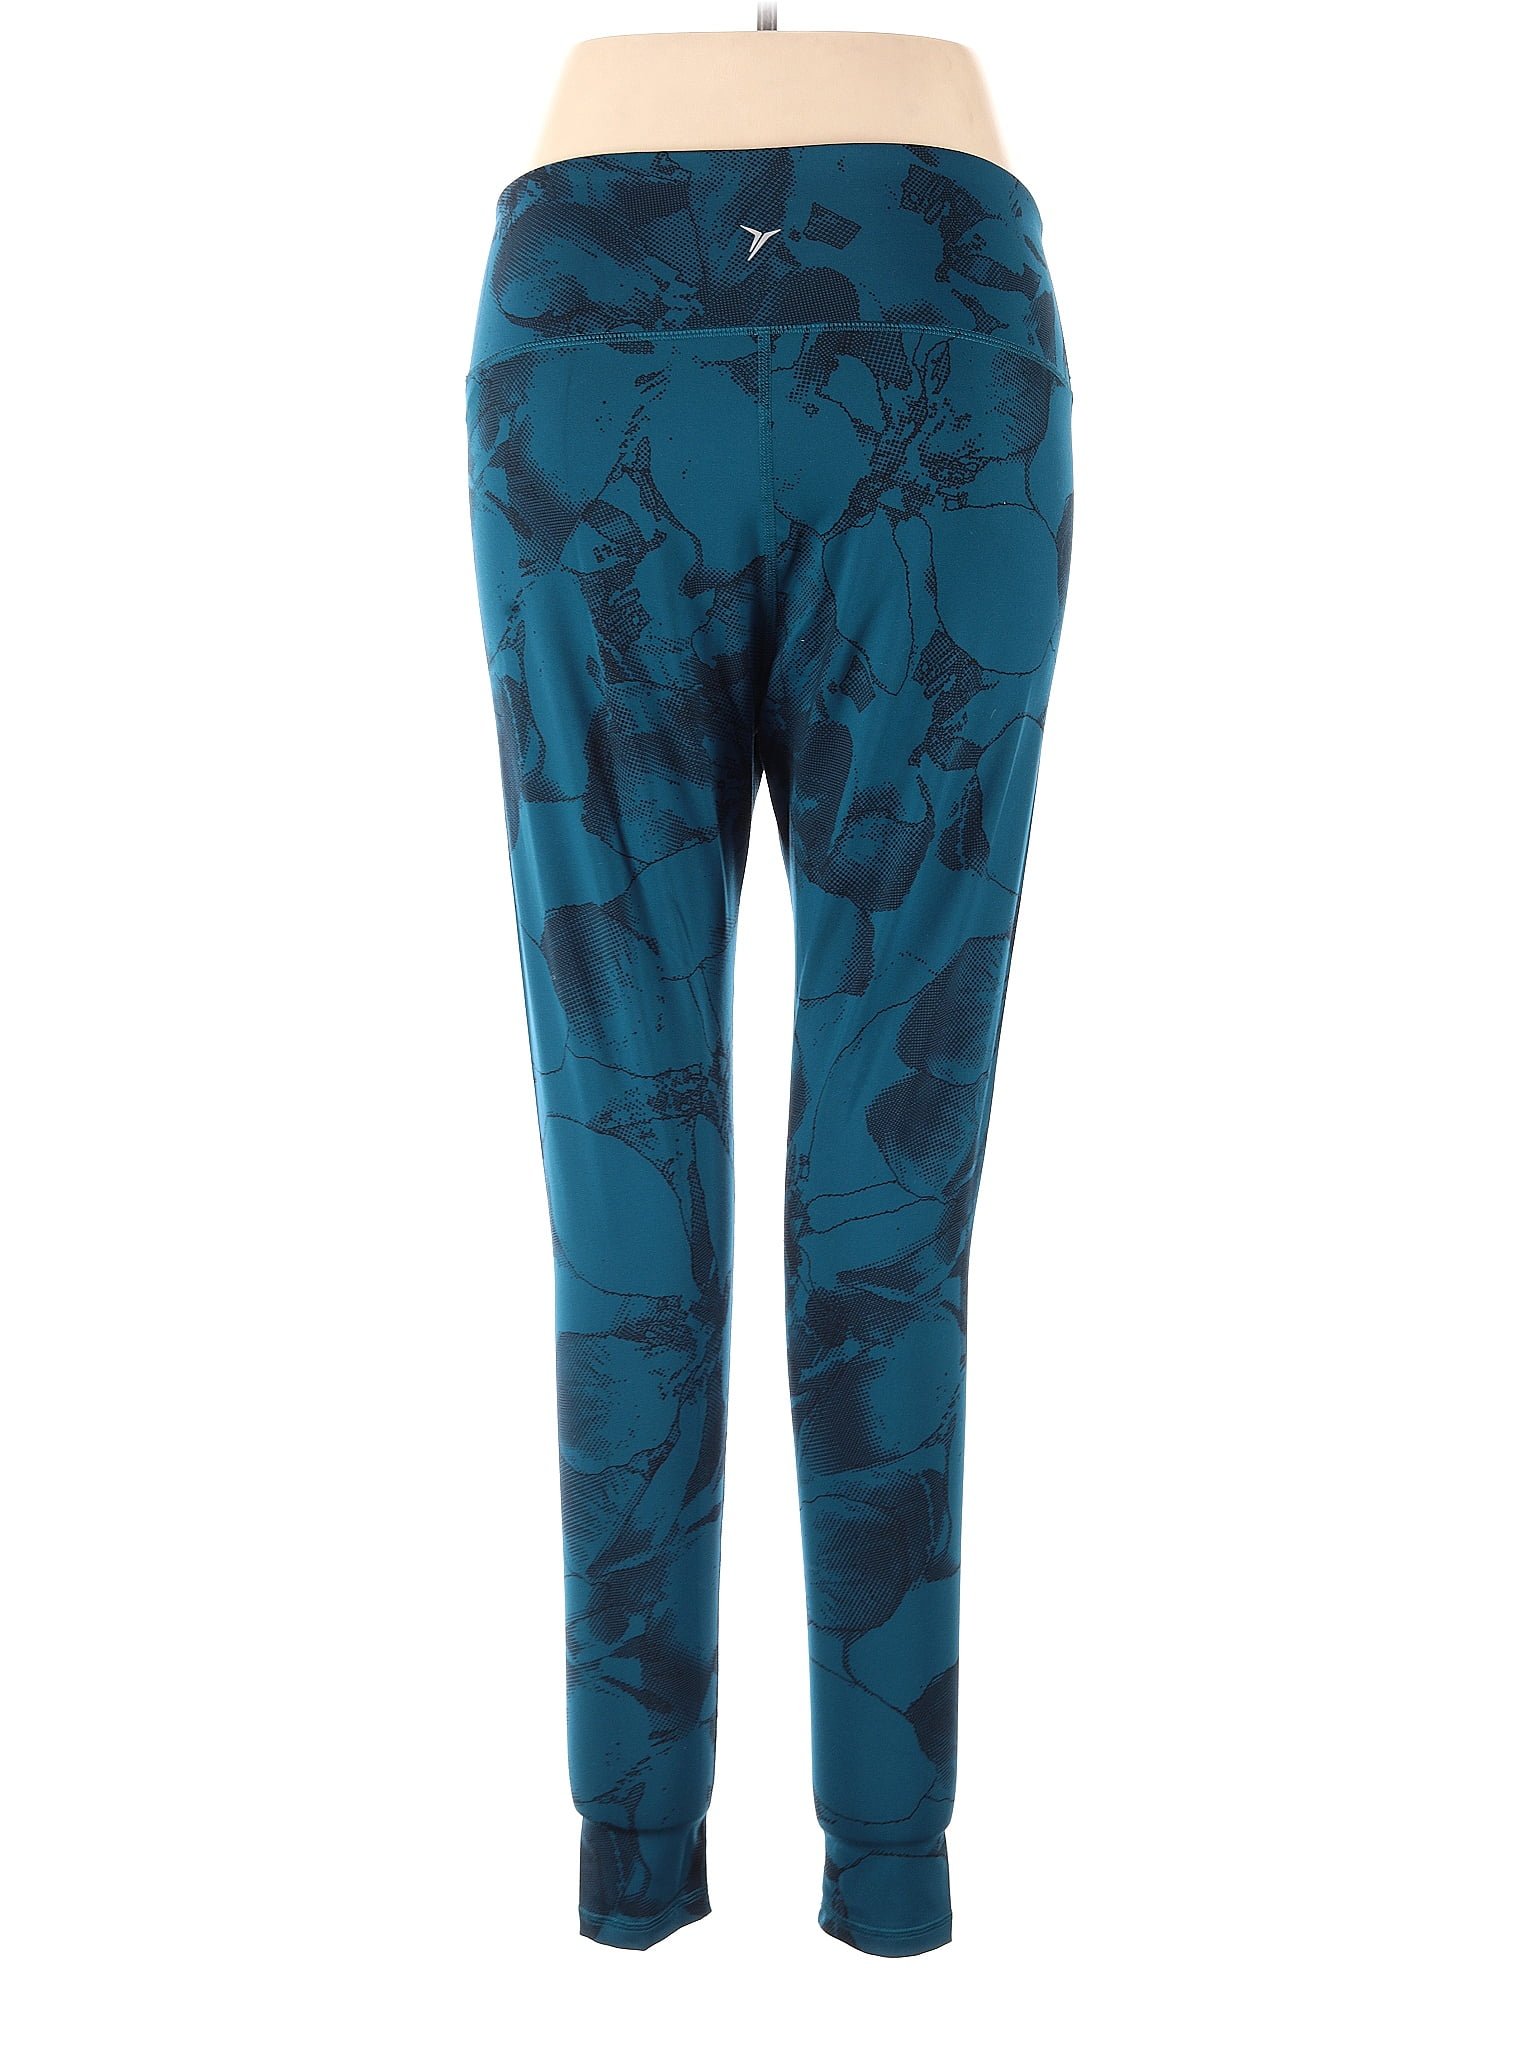 Active by Old Navy Floral Teal Blue Leggings Size XL - 47% off